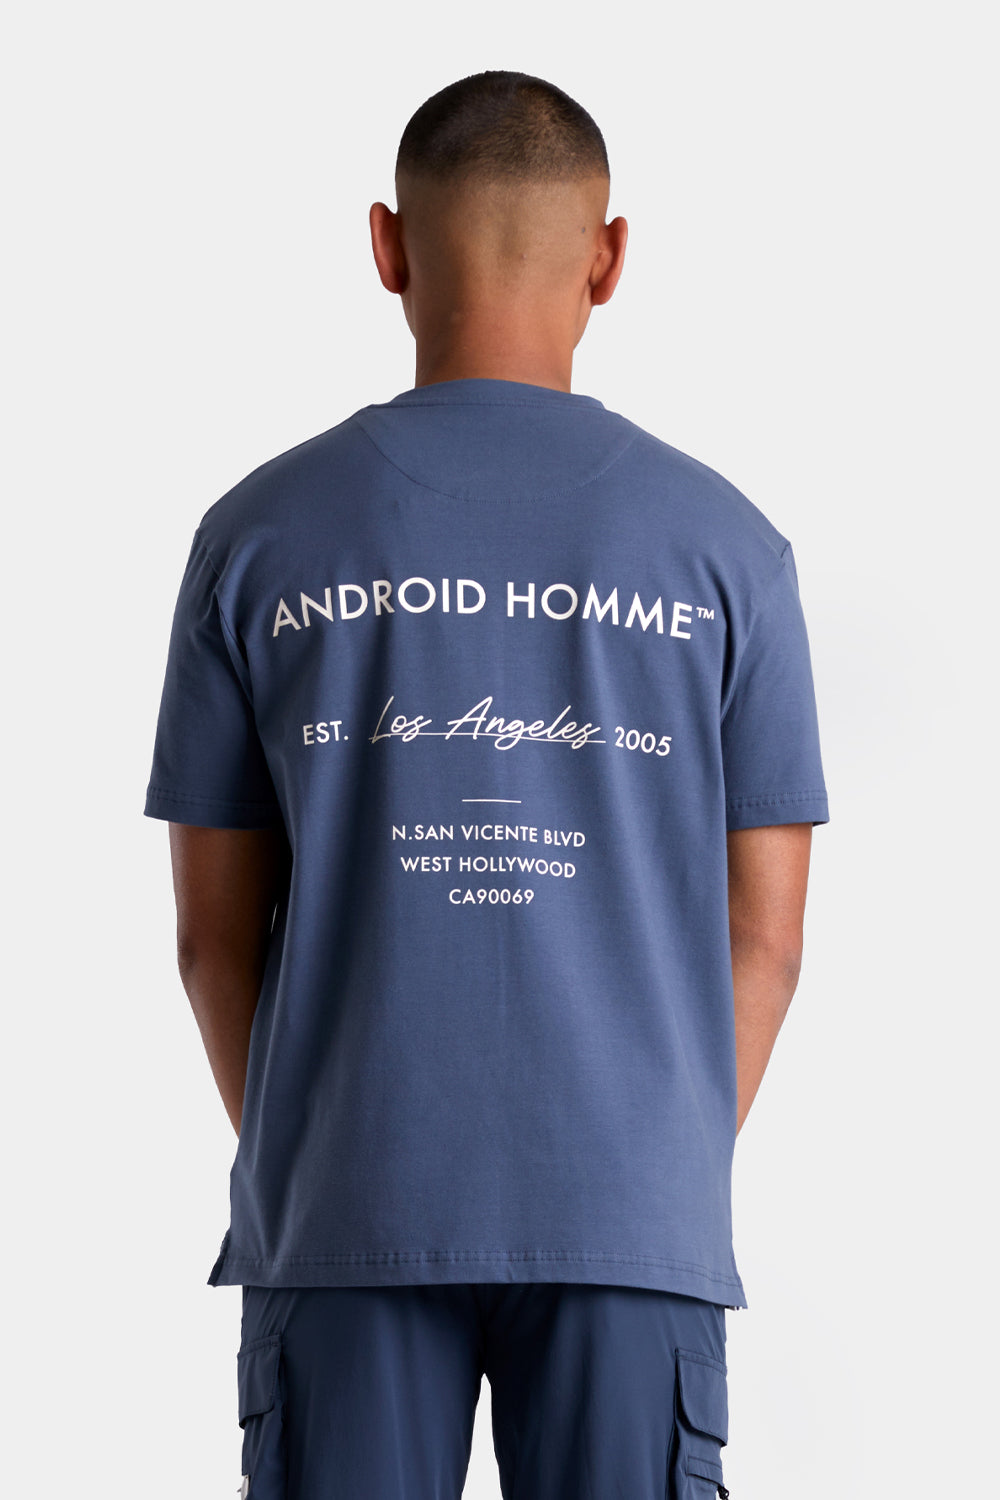 Buy the Android Homme Location T-shirt Charcoal at Intro. Spend £50 for free UK delivery. Official stockists. We ship worldwide.